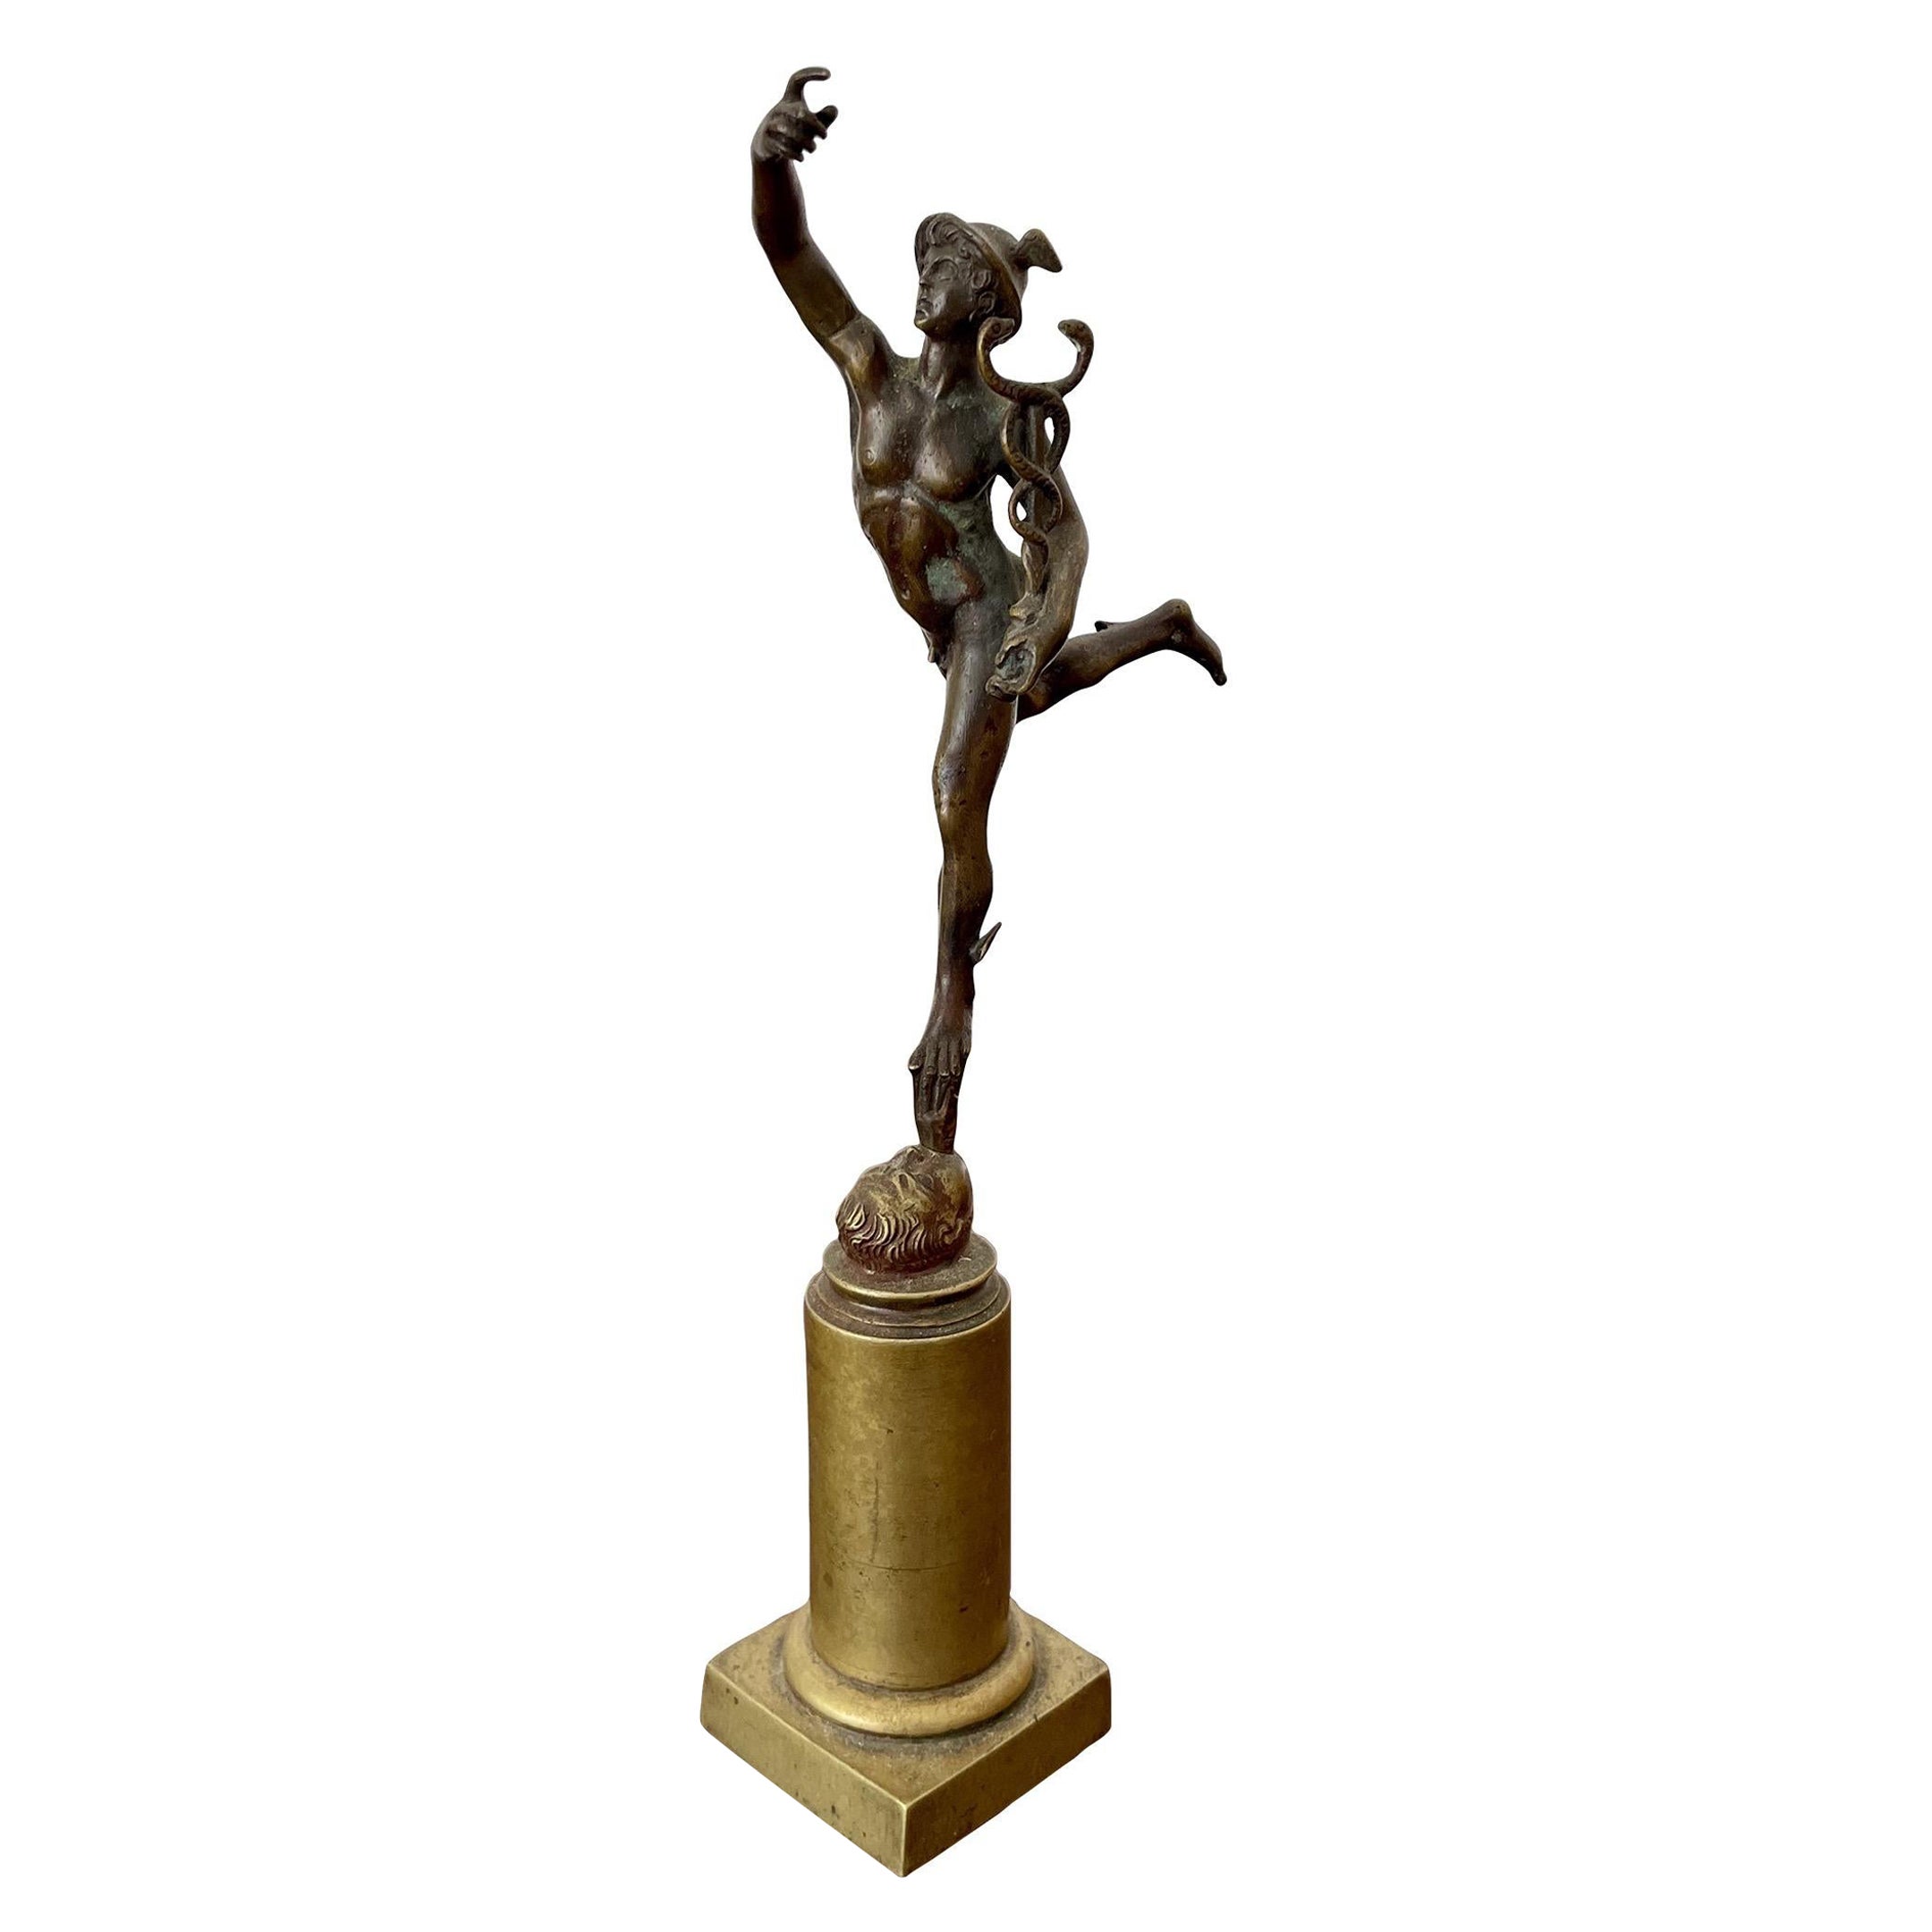 Early 20th Century Miniature Bronze Statue of Hermes with Staff